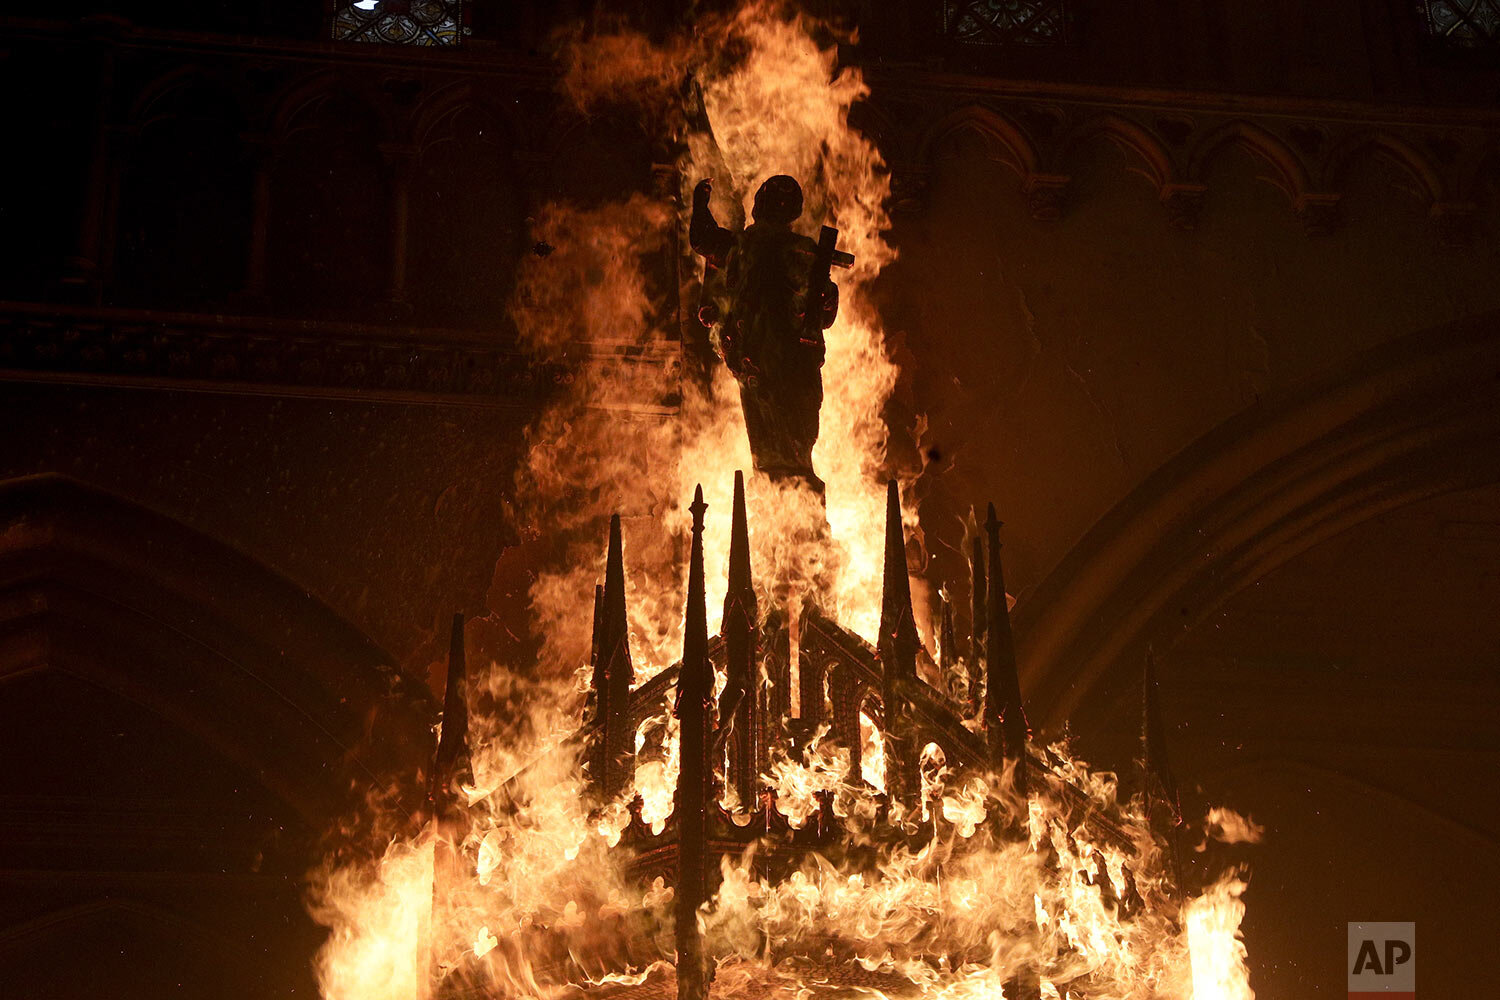  A saint statue is engulfed in flames after protesters torched the San Francisco de Borja church, a favorite of Chile's national police force, on the one-year anniversary of the start of mass, anti-government protests over inequality in Santiago, Chi